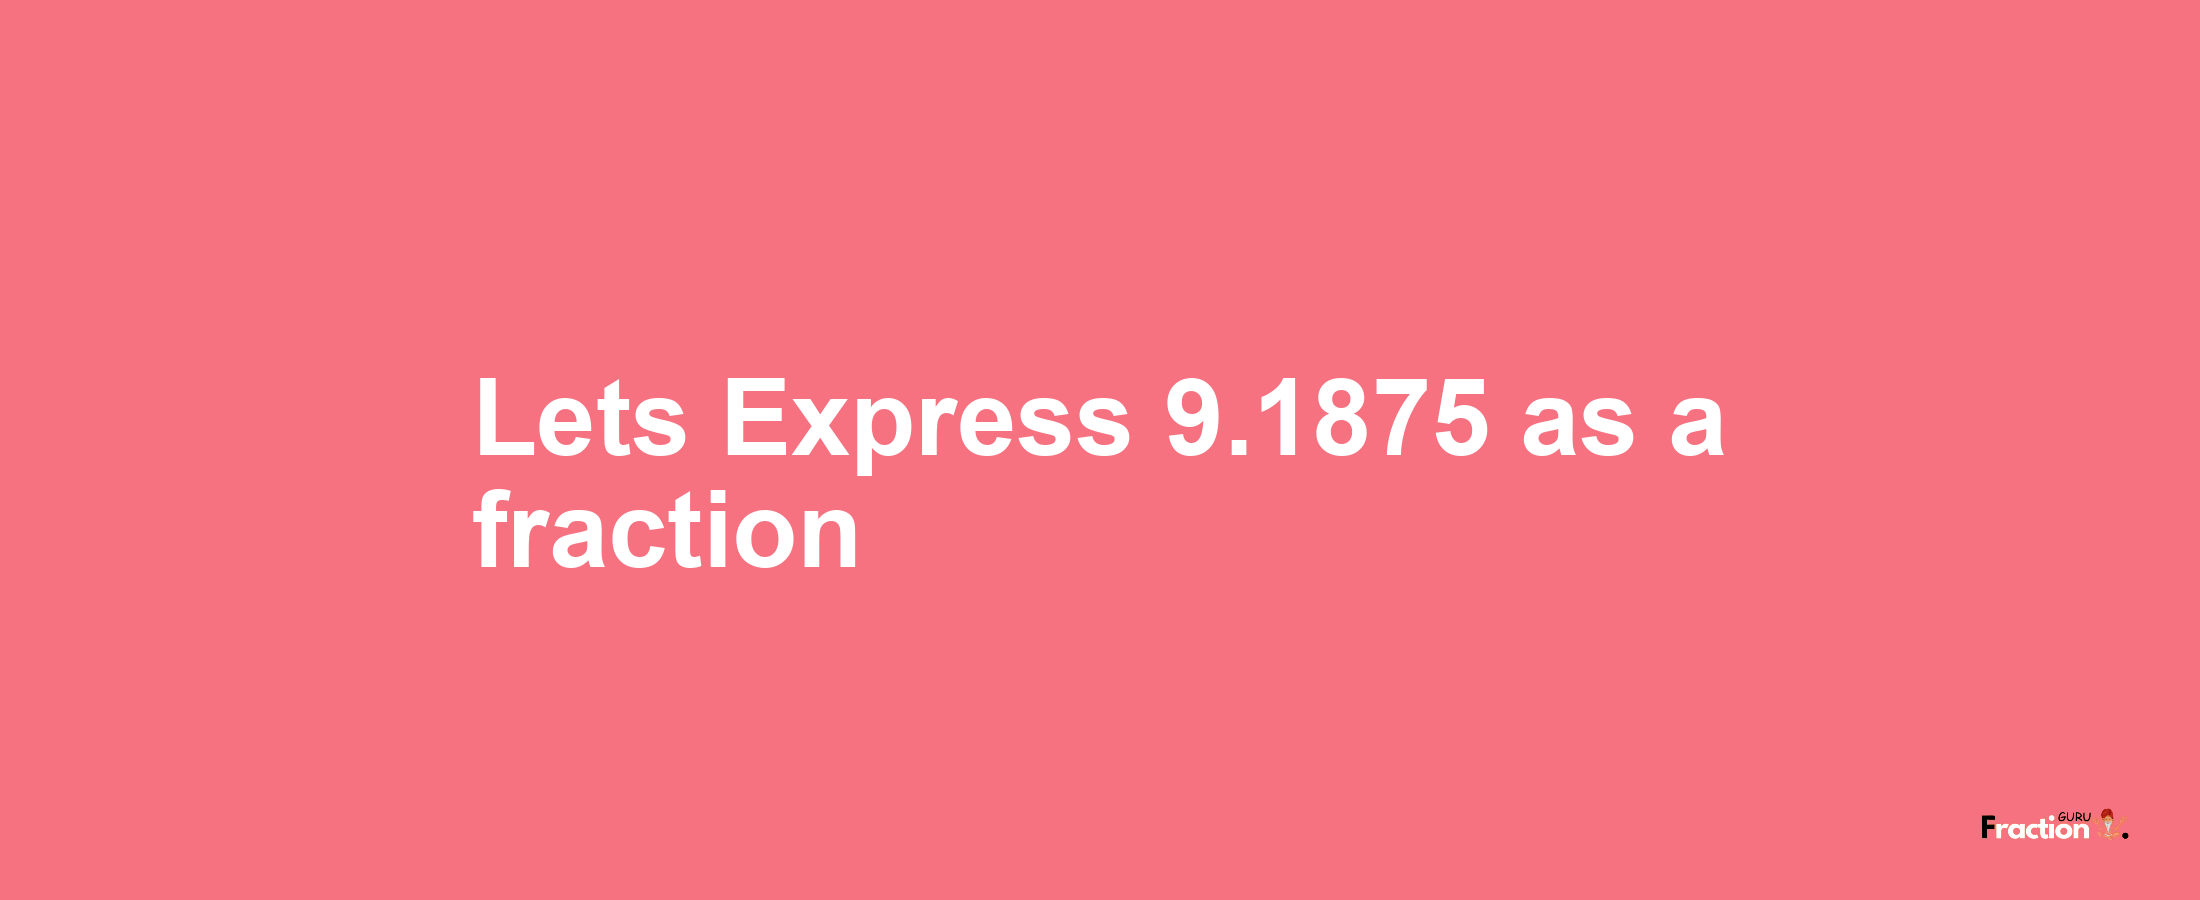 Lets Express 9.1875 as afraction